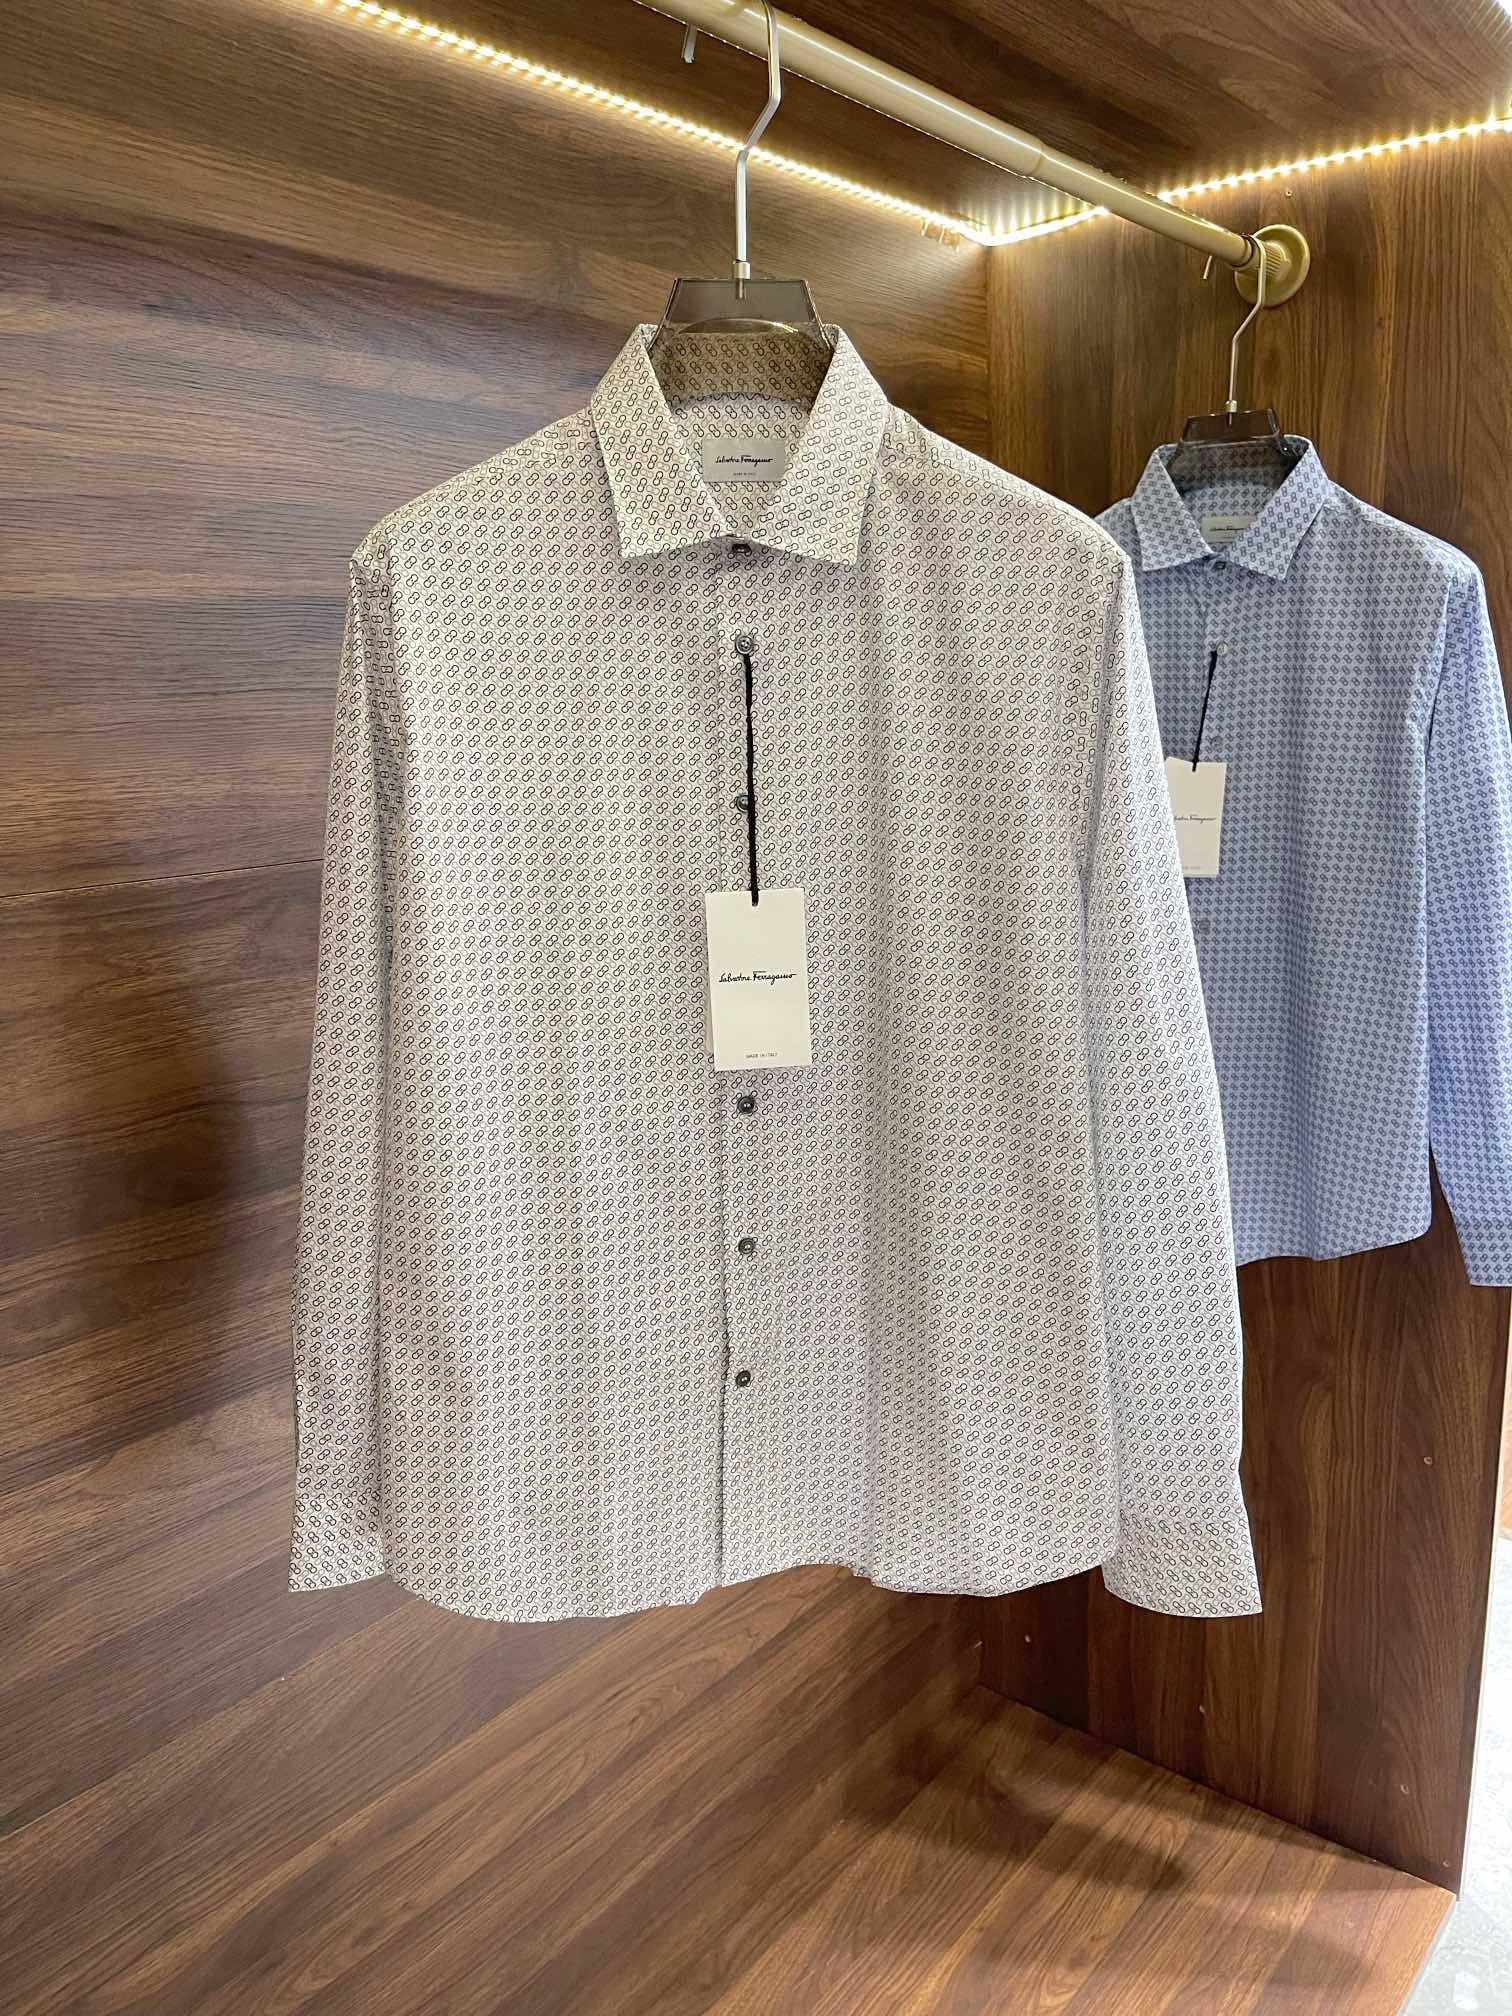 Ferragamo Clothing Shirts & Blouses Blue White Printing Fall/Winter Collection Fashion Casual